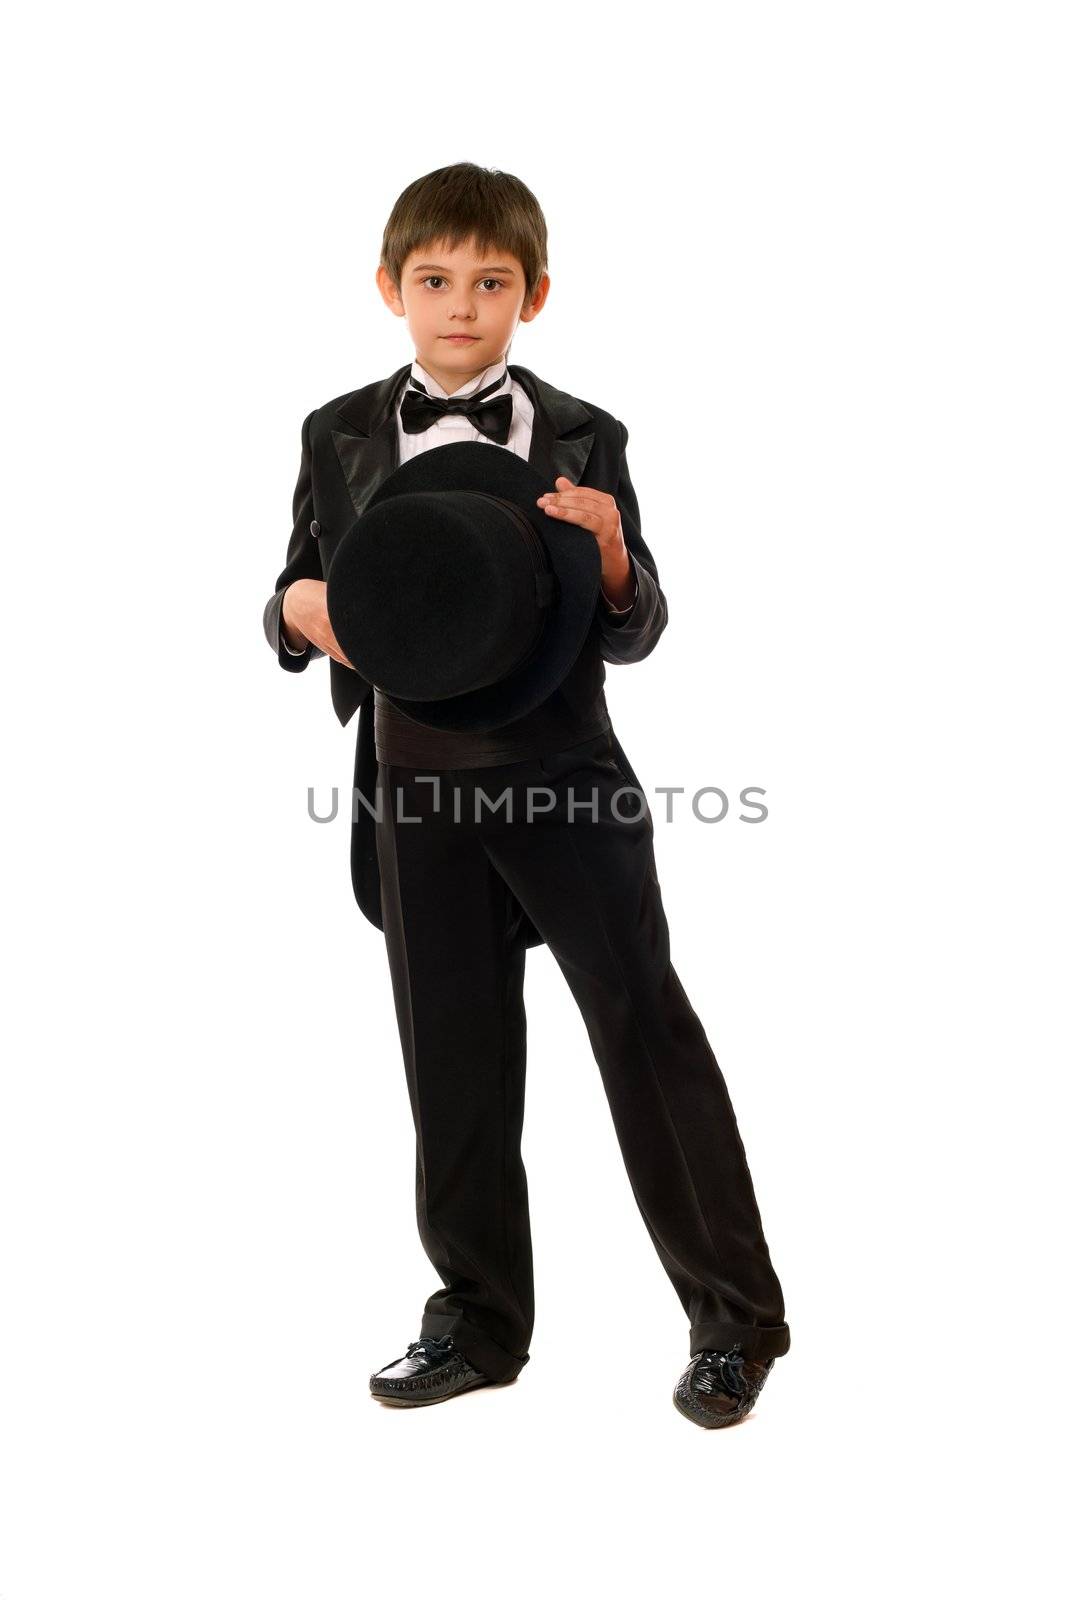 Little boy in tuxedo with a hat. Isolated